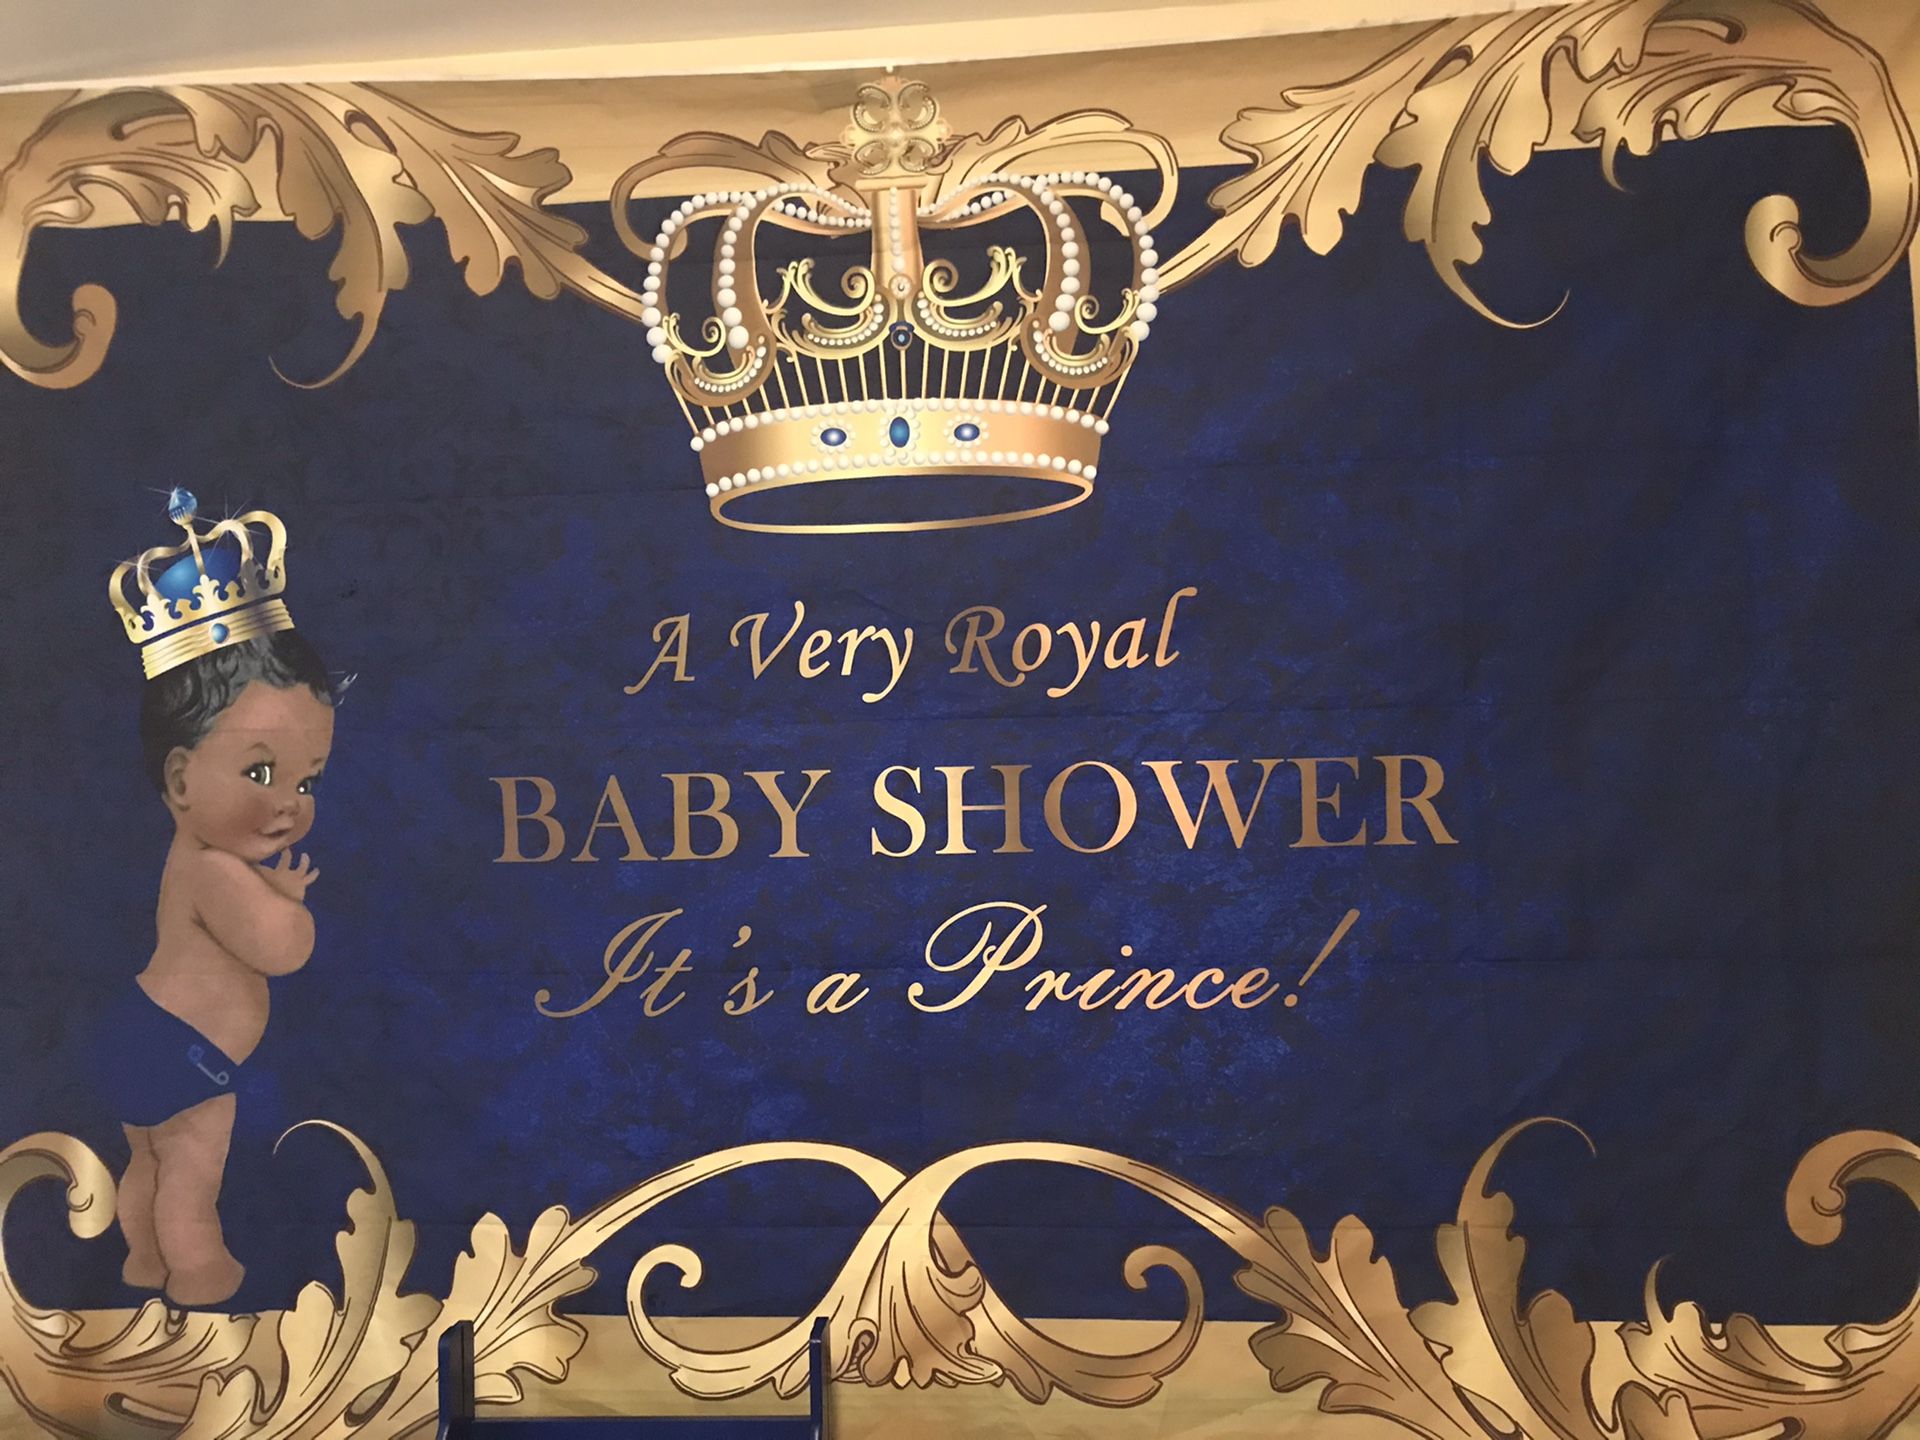 Royal Prince Baby Shower decorations